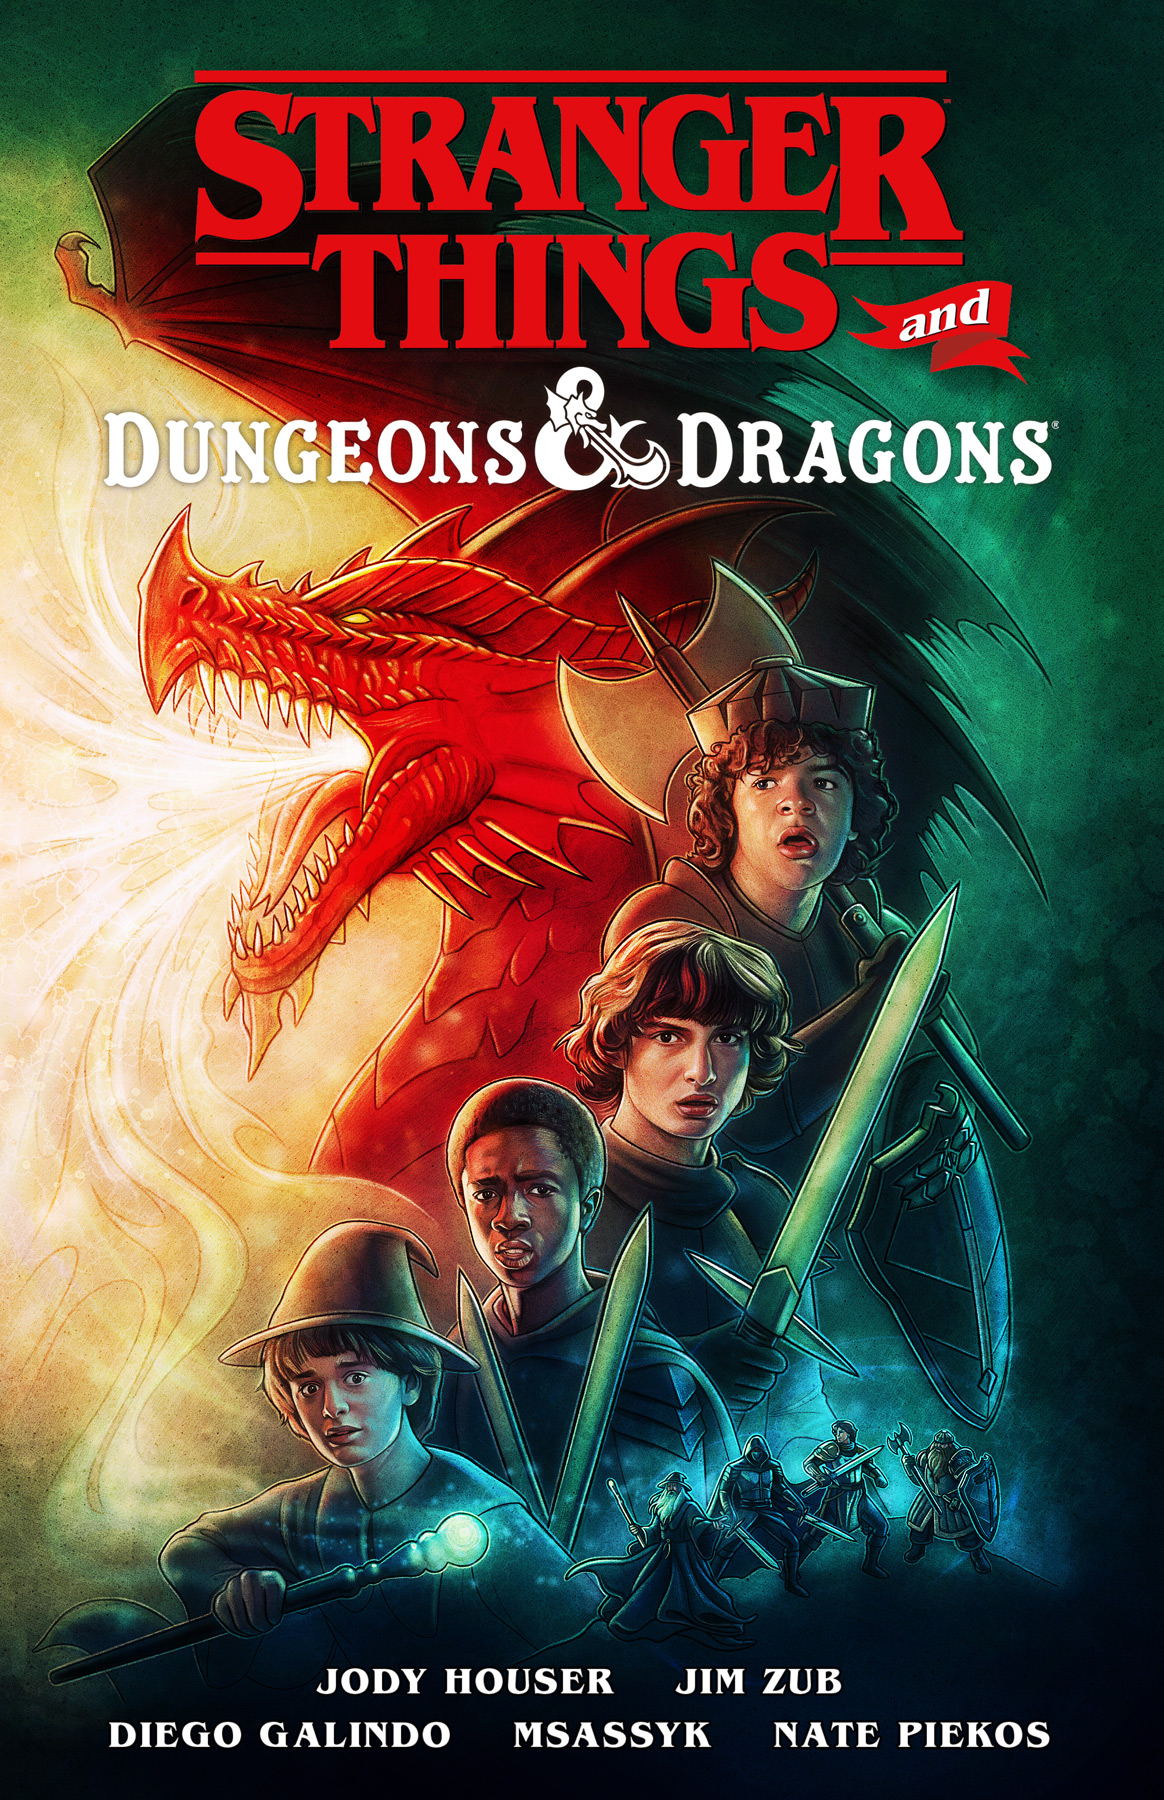 Stranger Things - Dungeons and Dragons